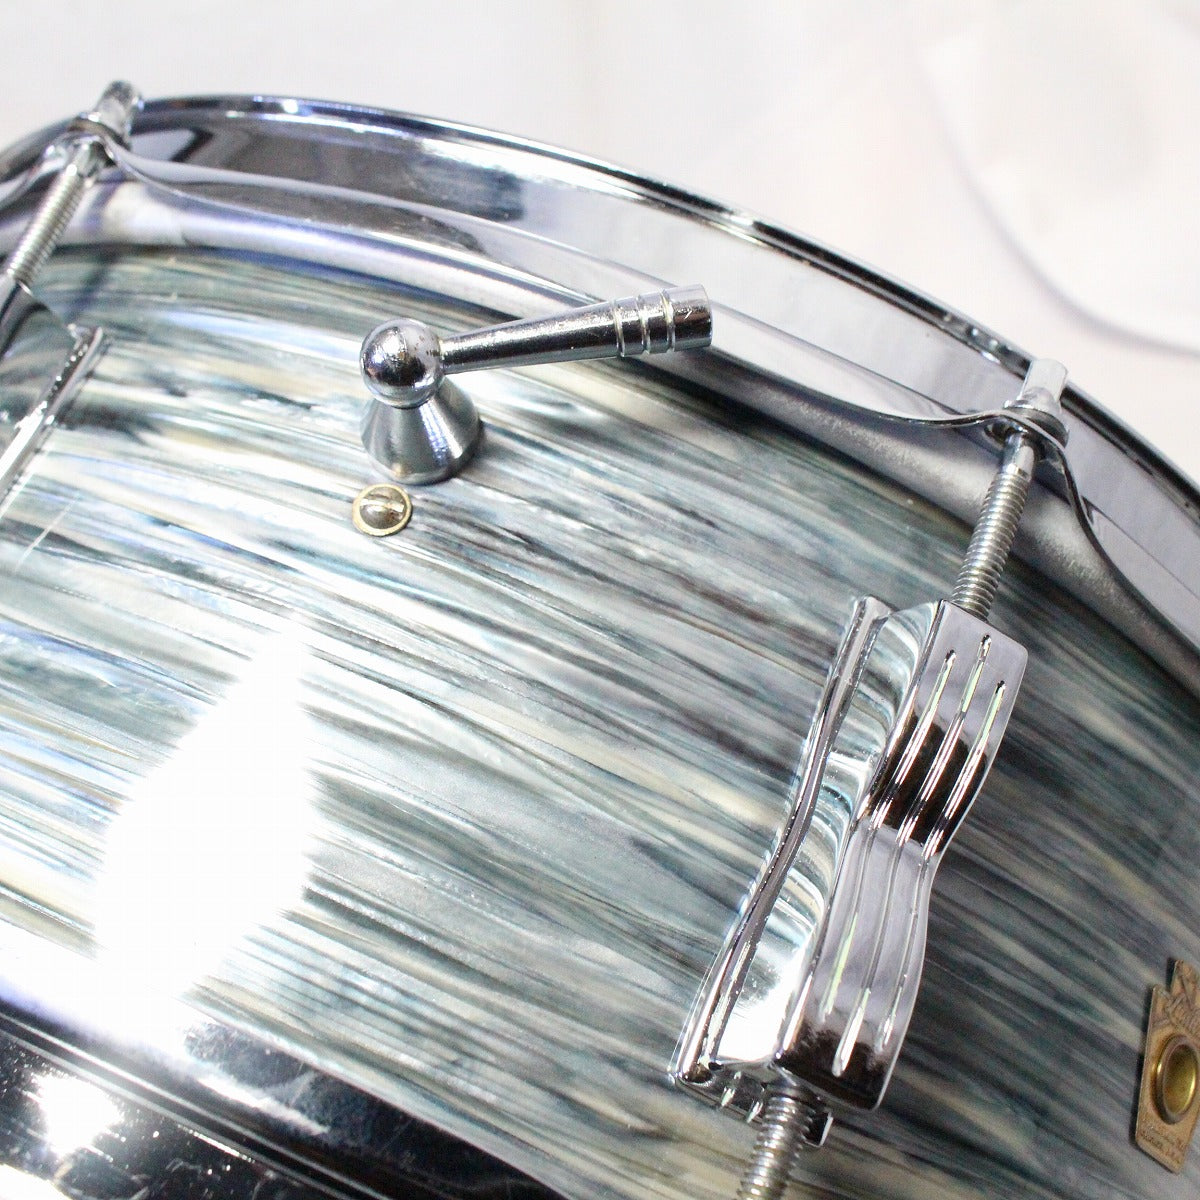 USED LUDWIG / 1965 JAZZFESTIVAL Blue Oyster(Refinish) 14x5.5 RADIC Snare Drum [08]